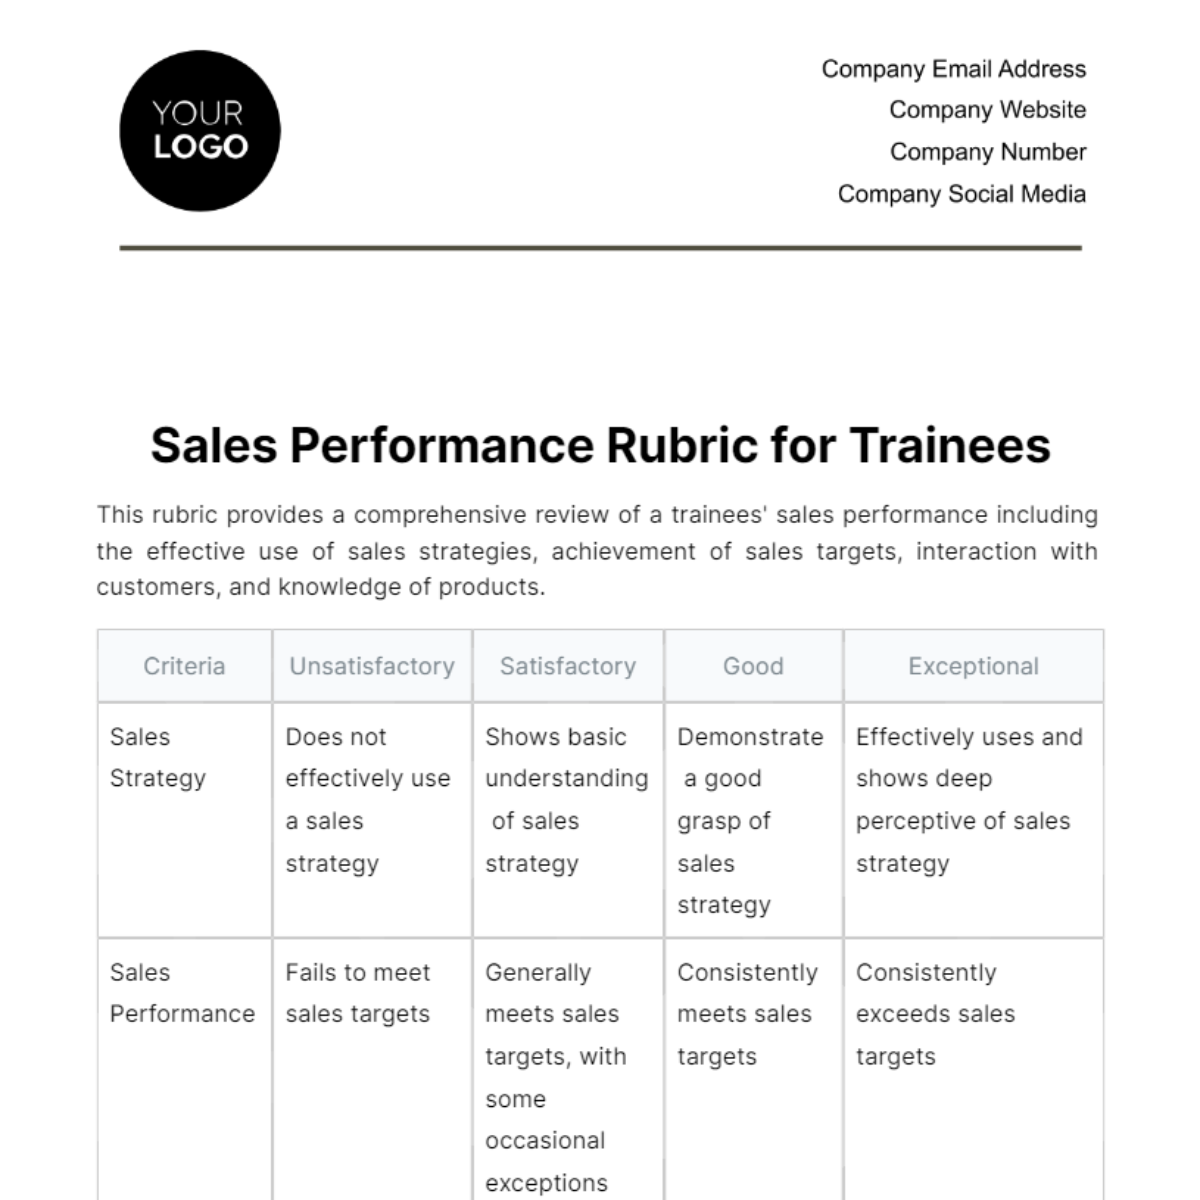 Free Sales Performance Rubric for Trainees Template